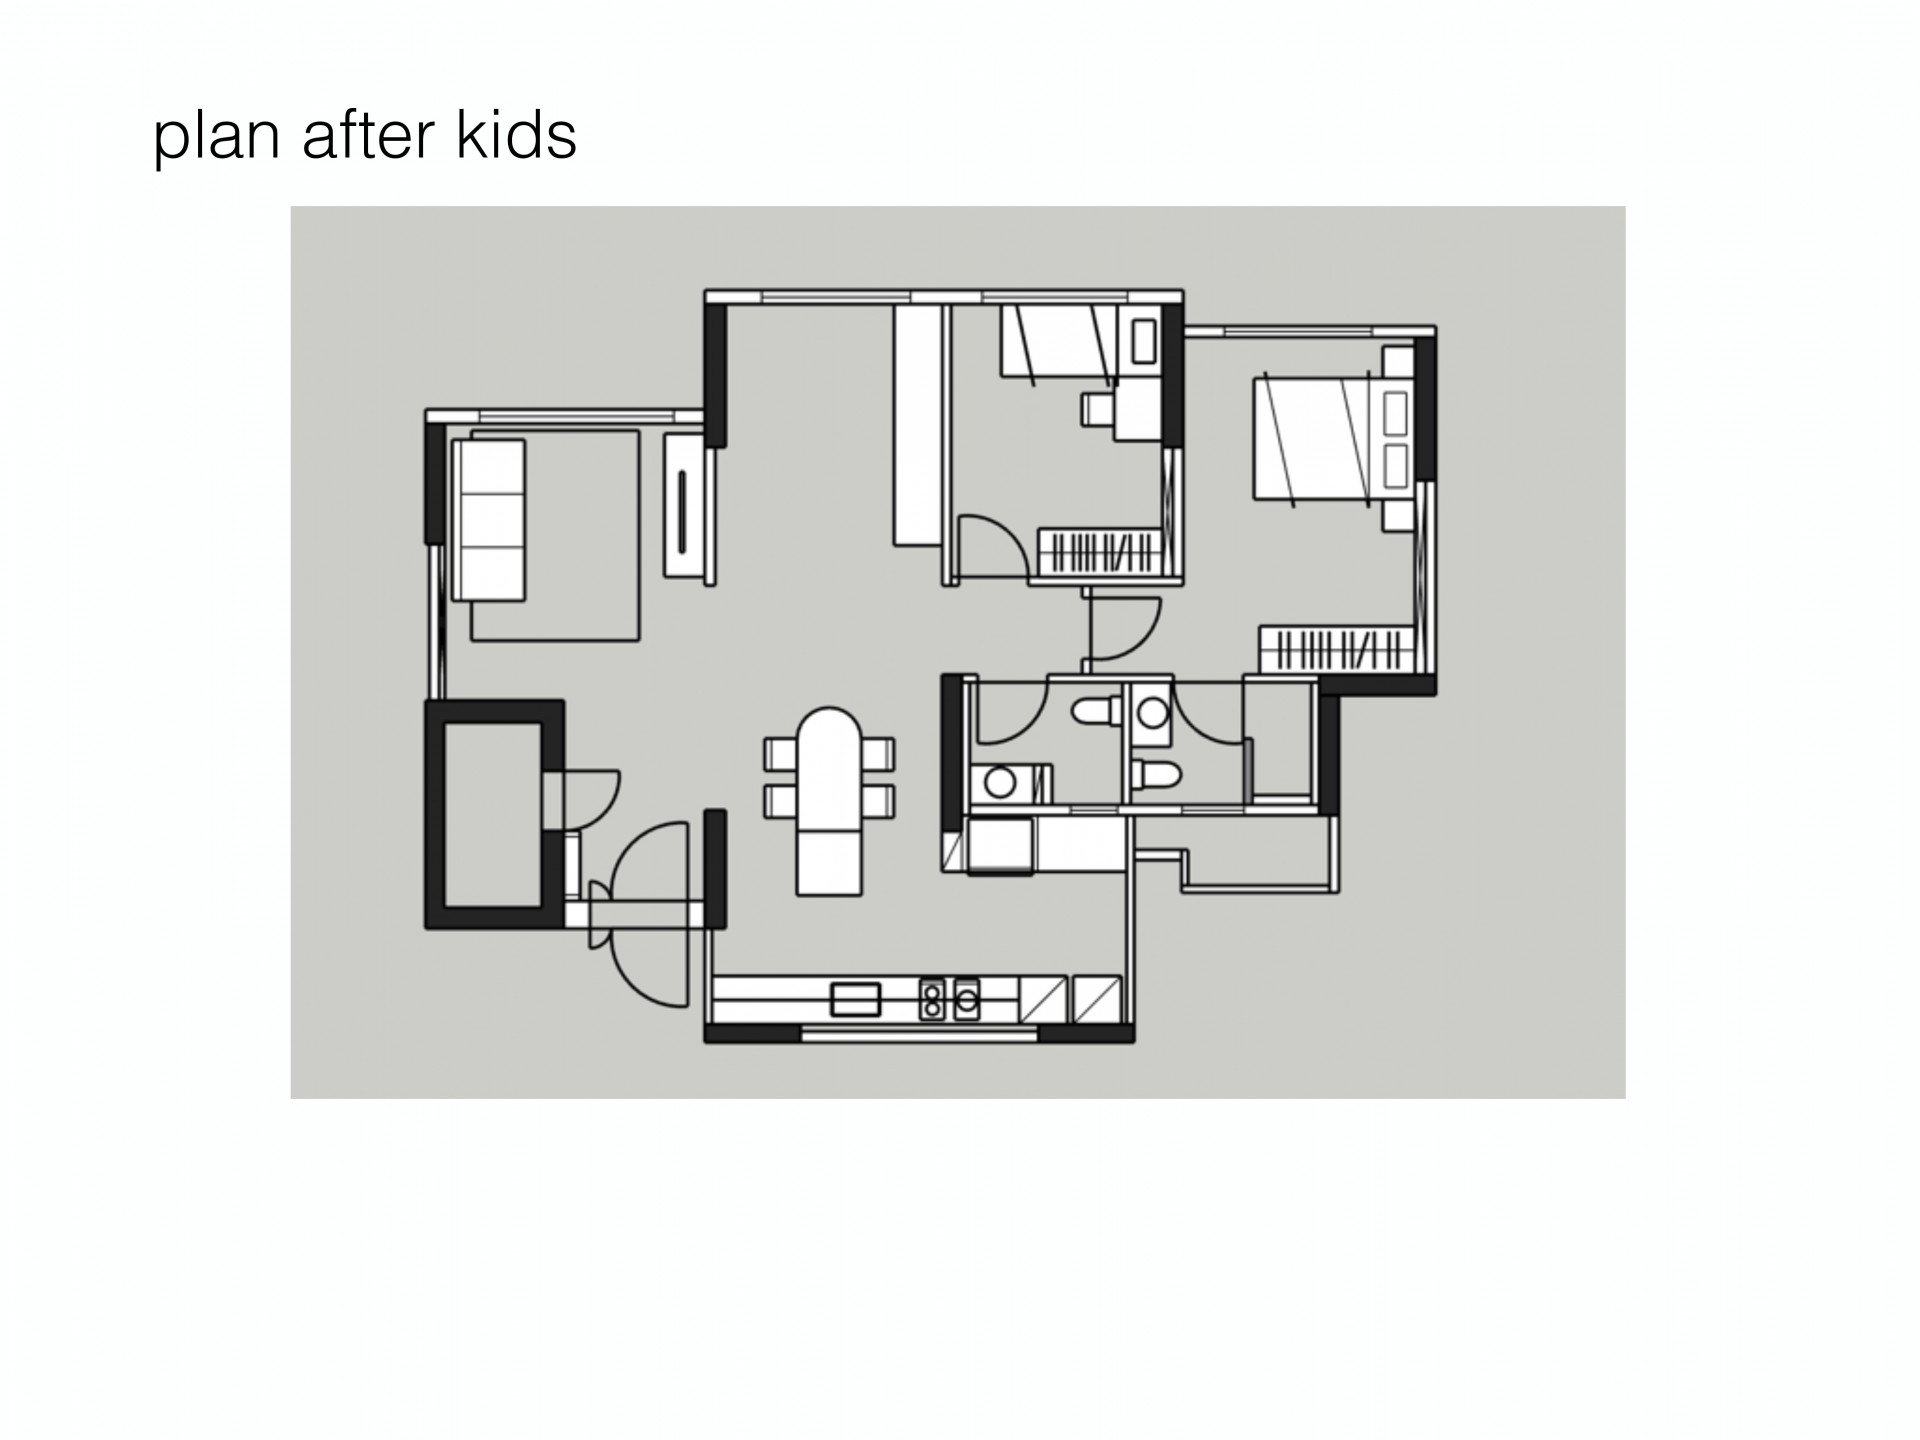 meiyi home design singapore squarerooms floor plan before and after having kids